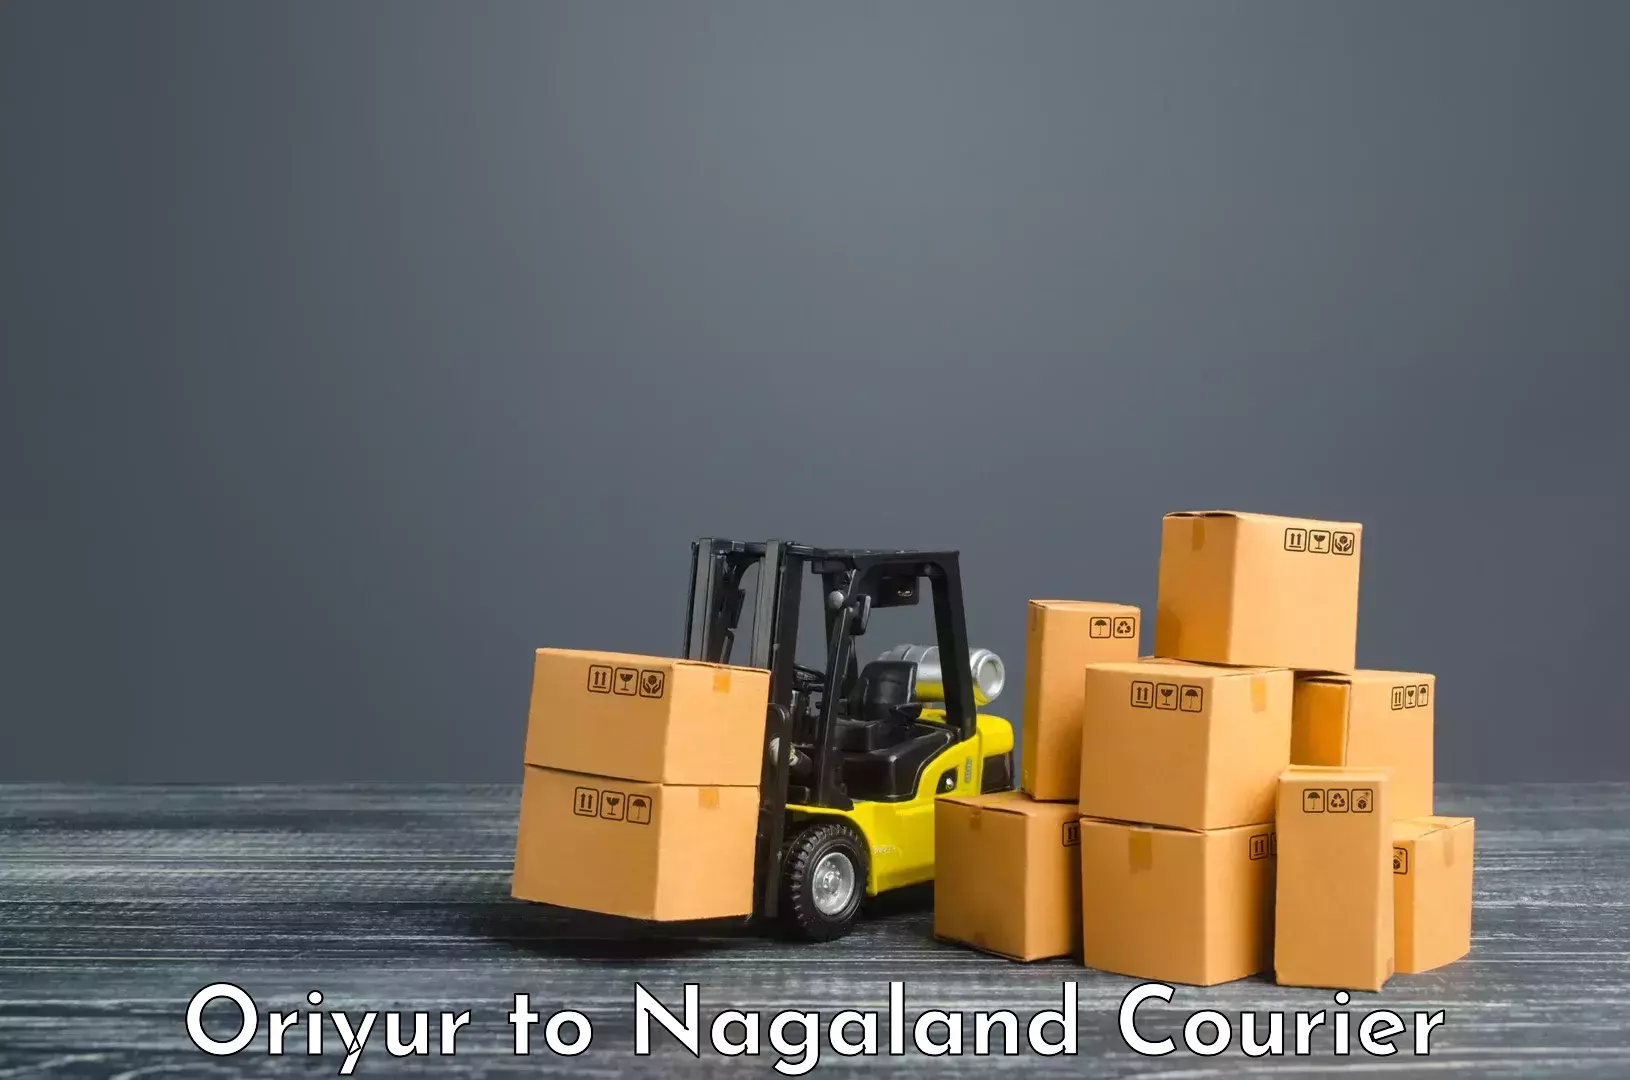 Cash on delivery service Oriyur to Nagaland